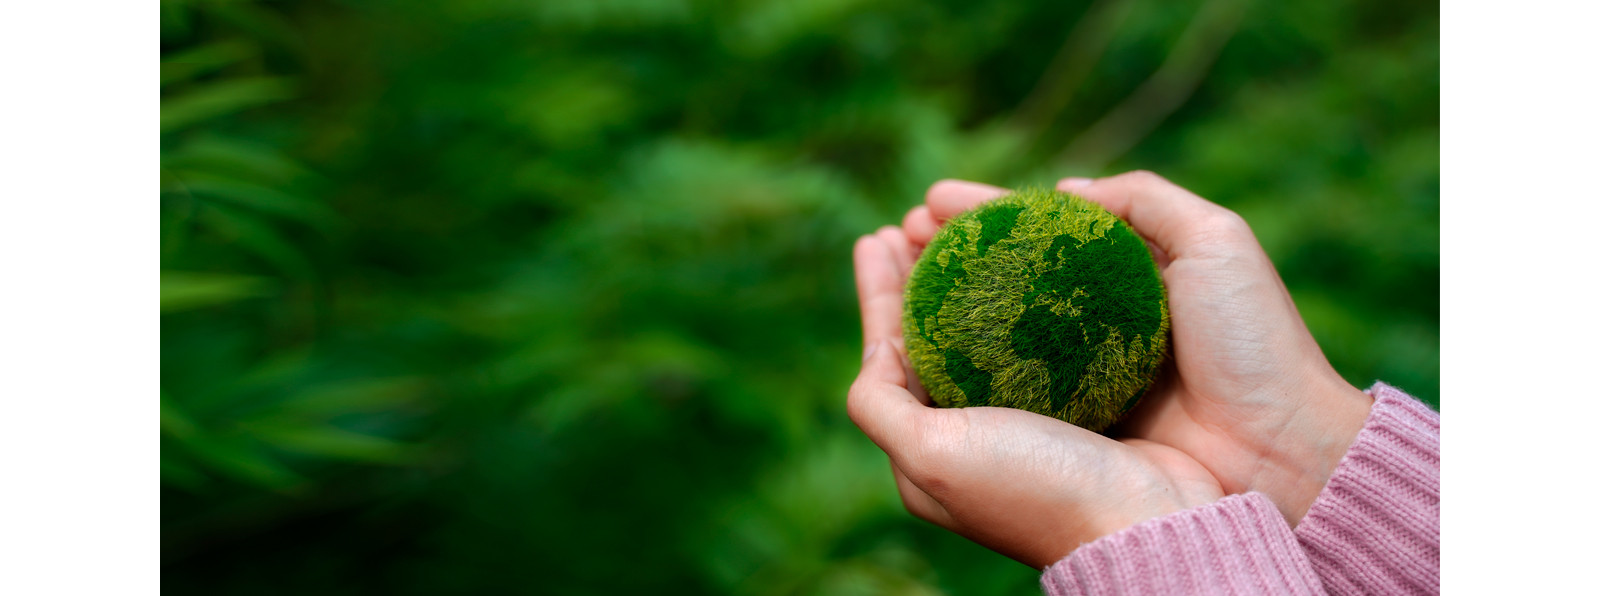 Women hands holding earth on green background.